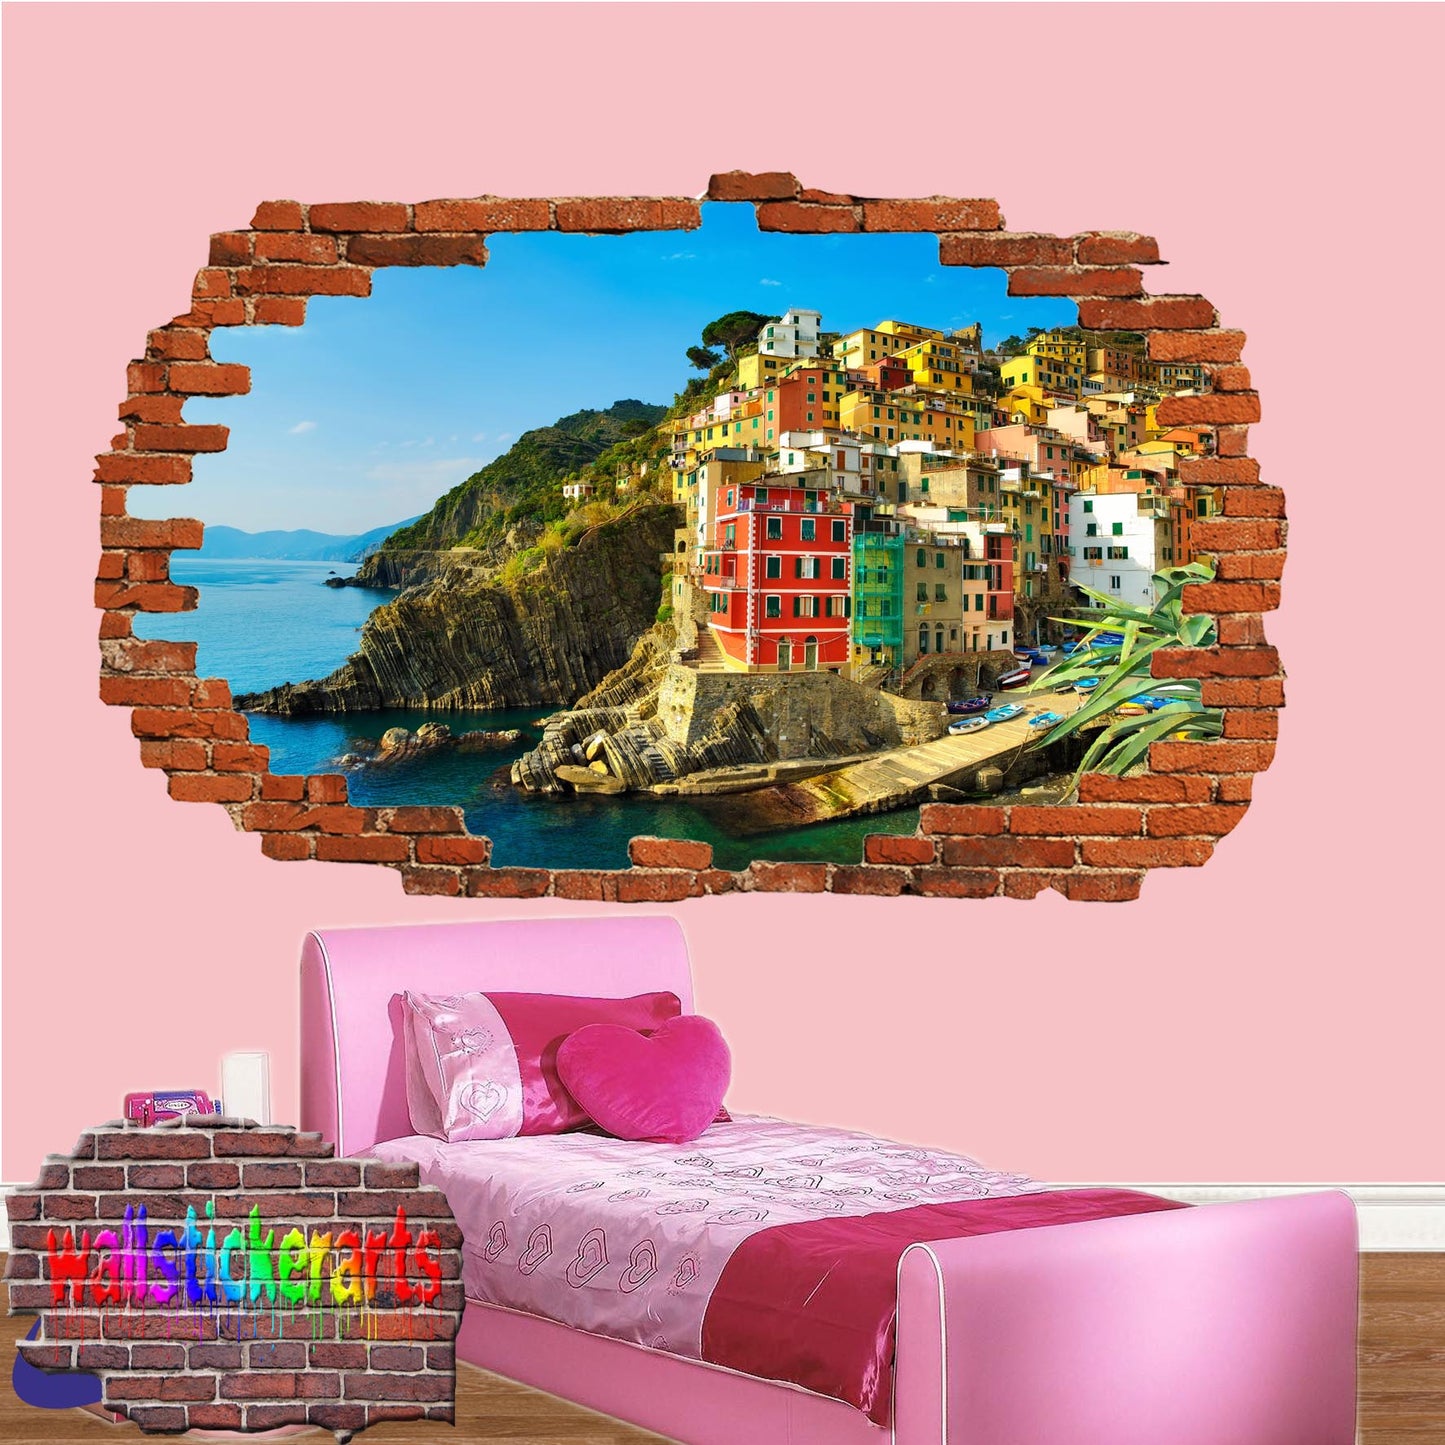 Italy Historic Positano Holiday Town 3d Art Smashed Effect Wall Sticker Room Office Nursery Shop Decor Decal Mural YD5